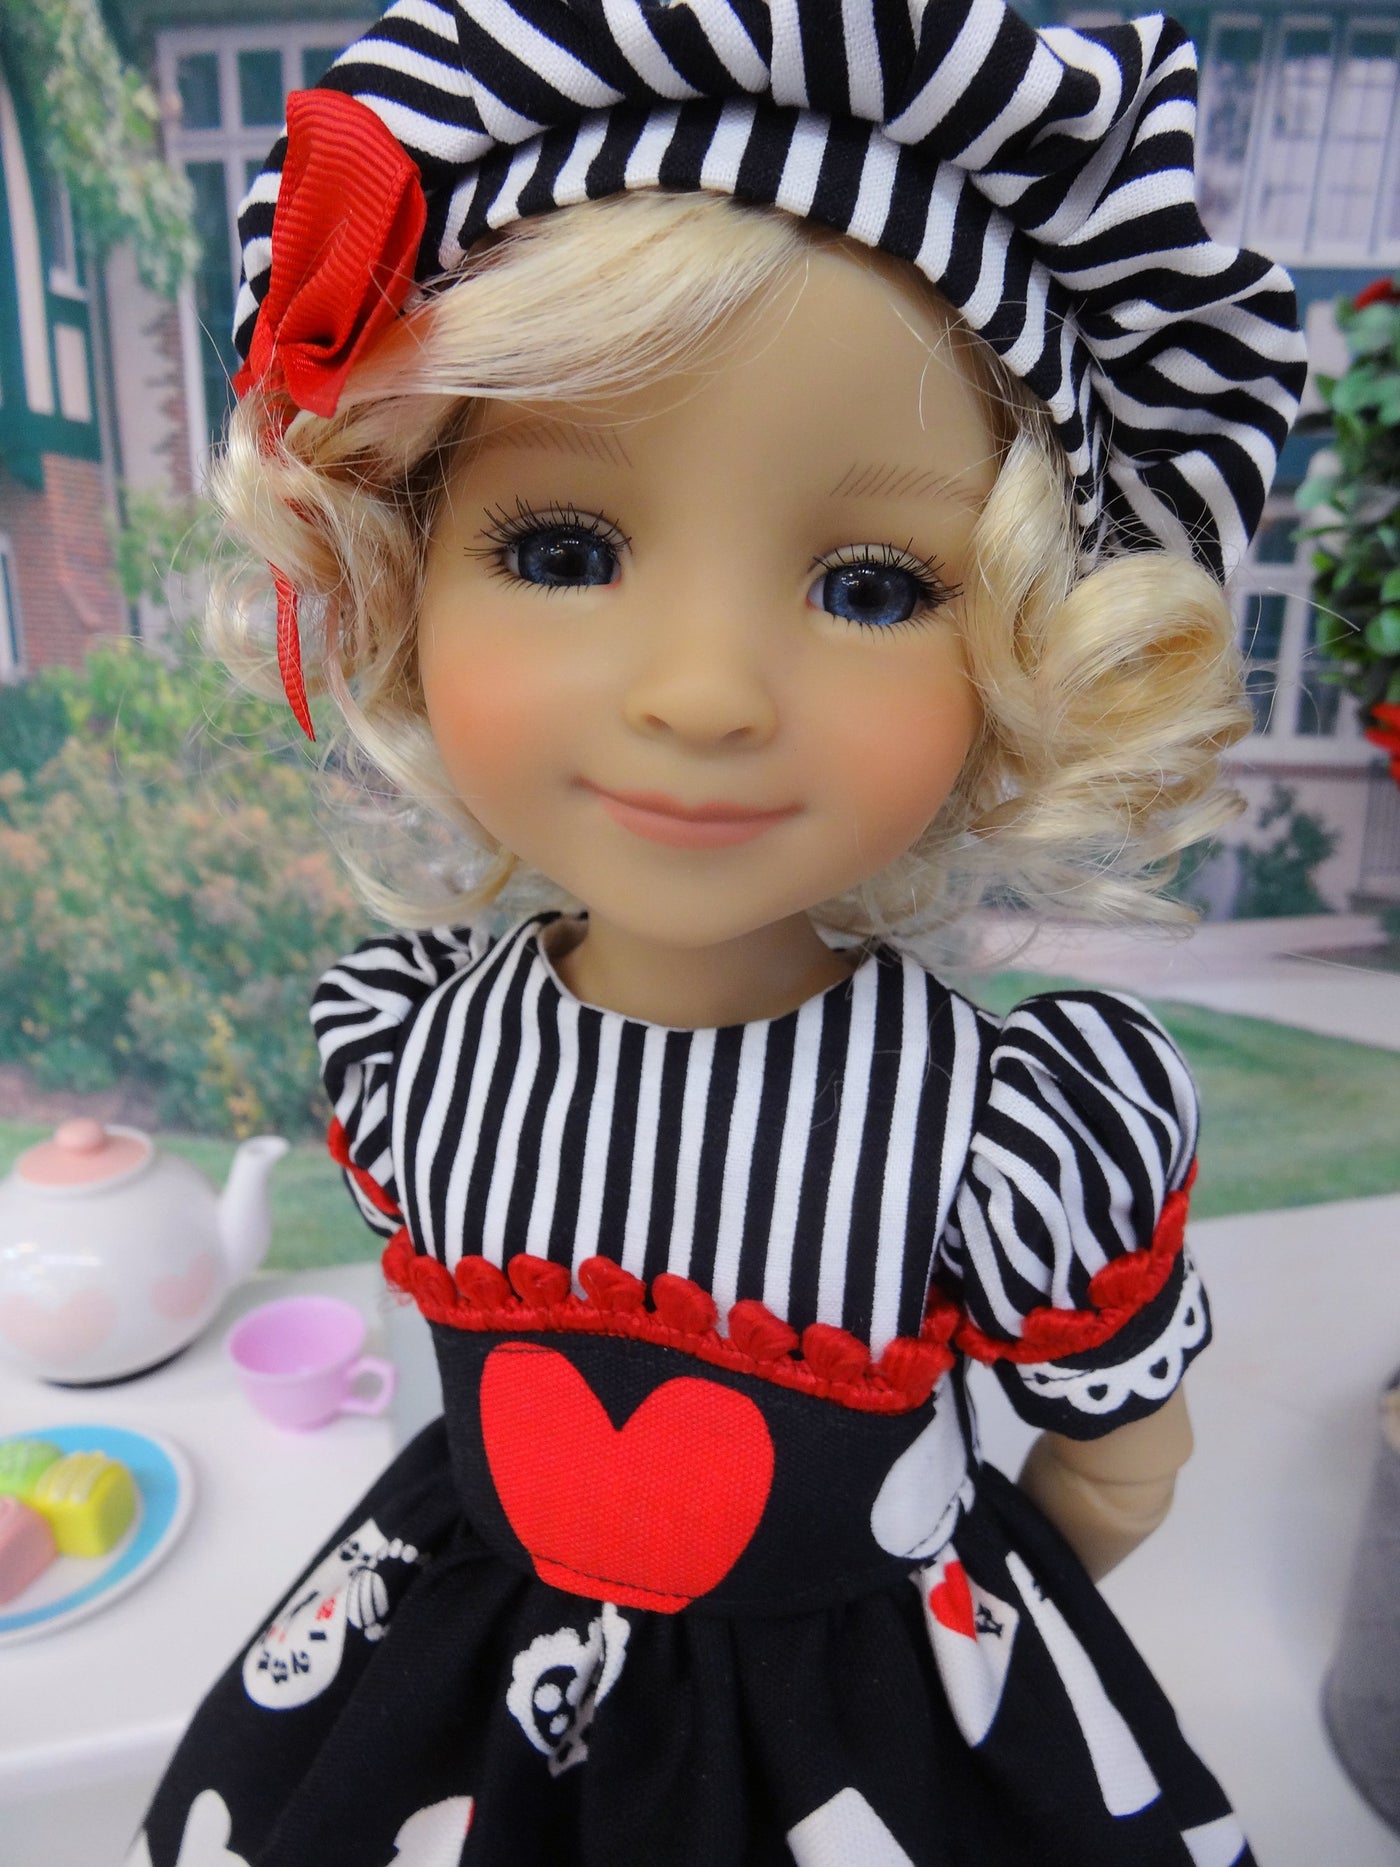 Wonderland Tea Party - dress for Ruby Red Fashion Friends doll